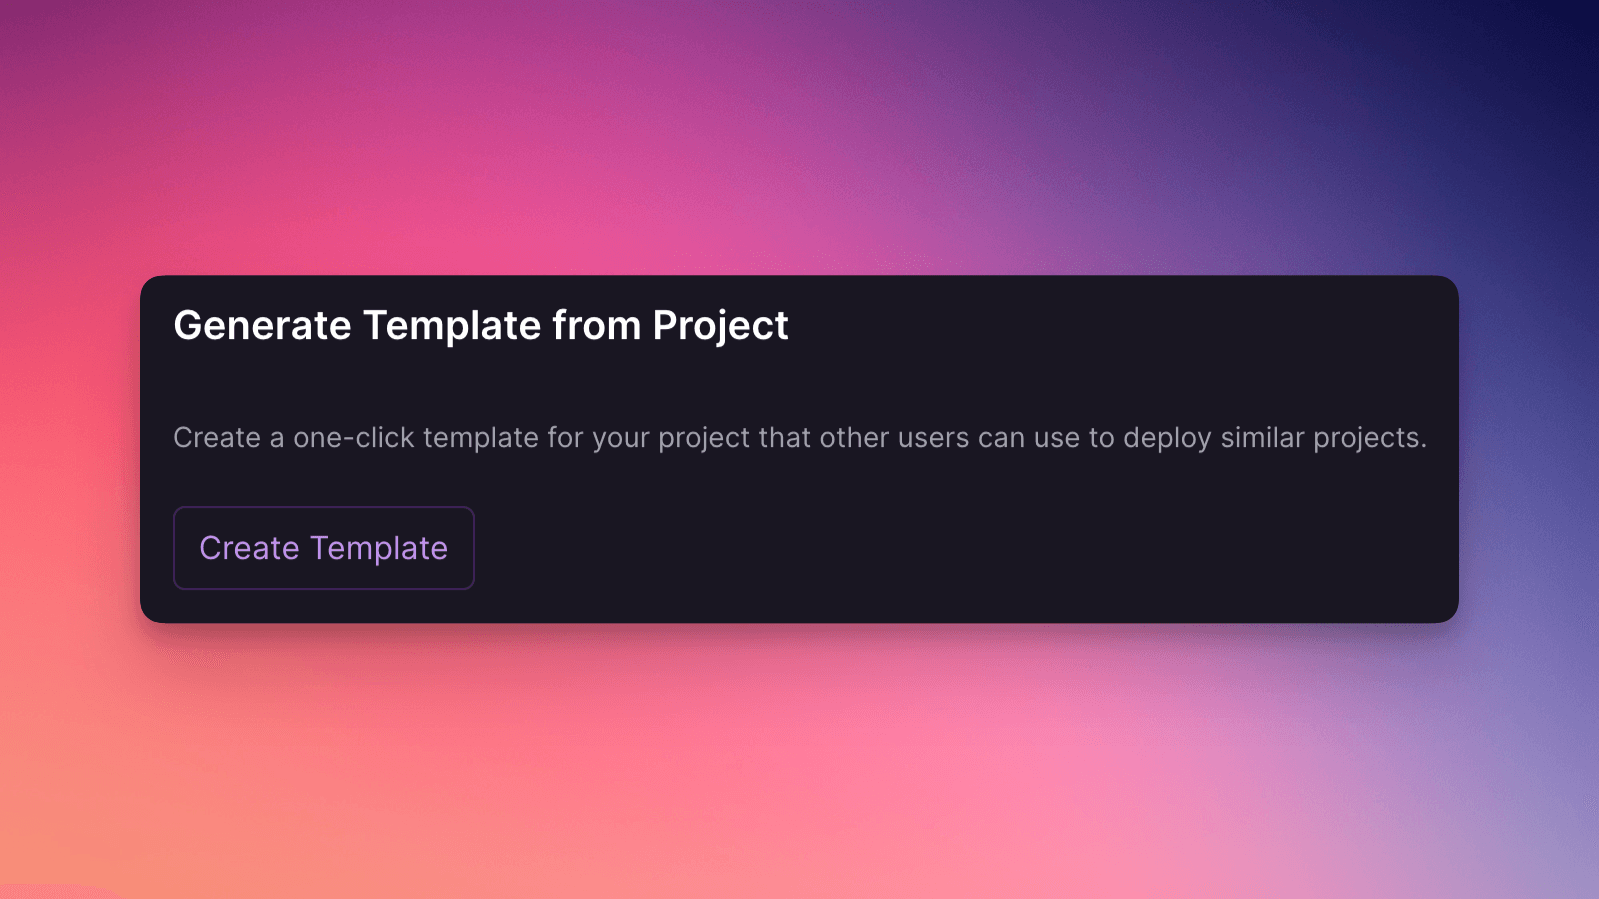 Generate template from project